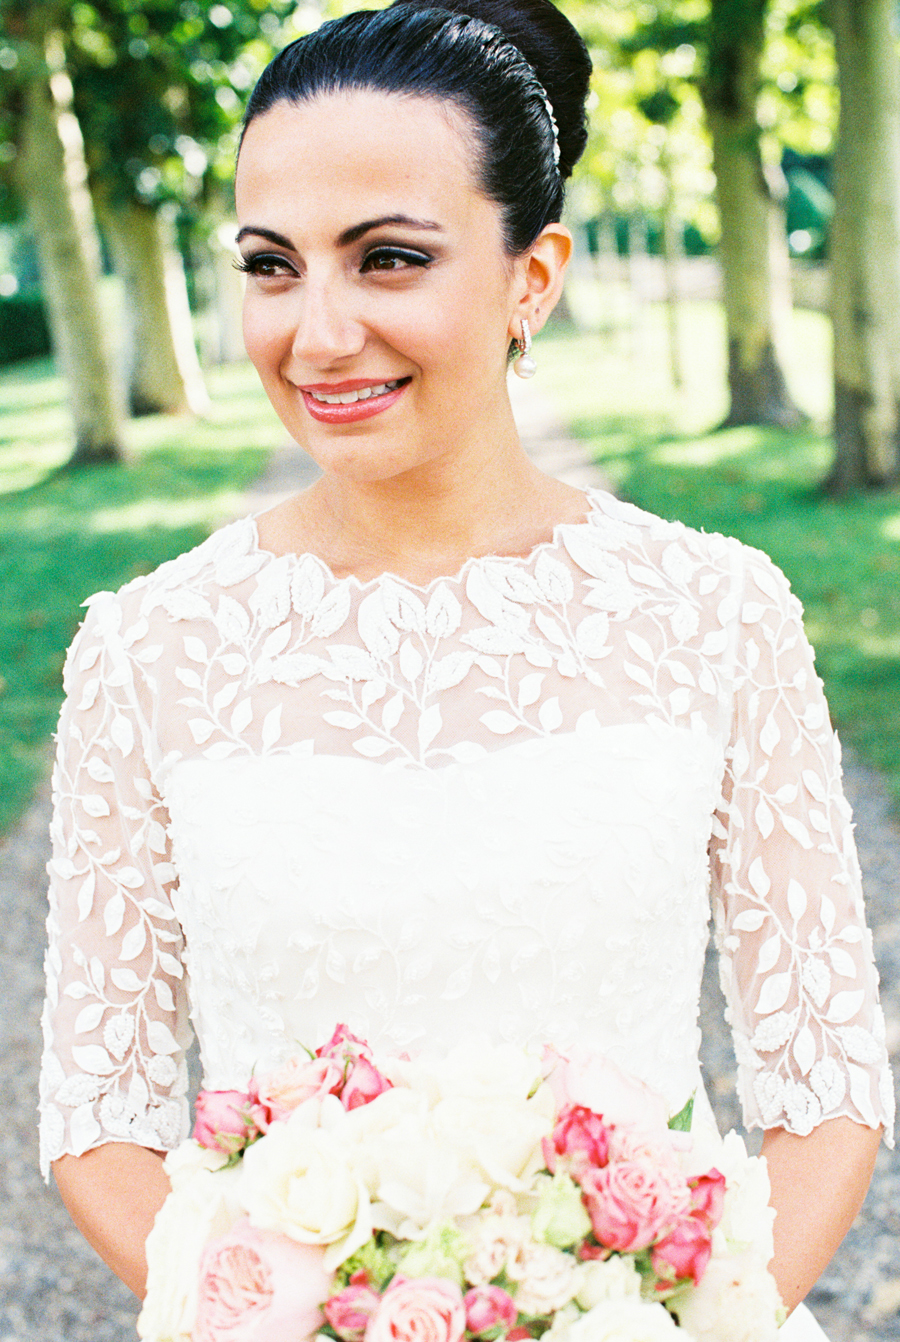 Bride with Classic Updo